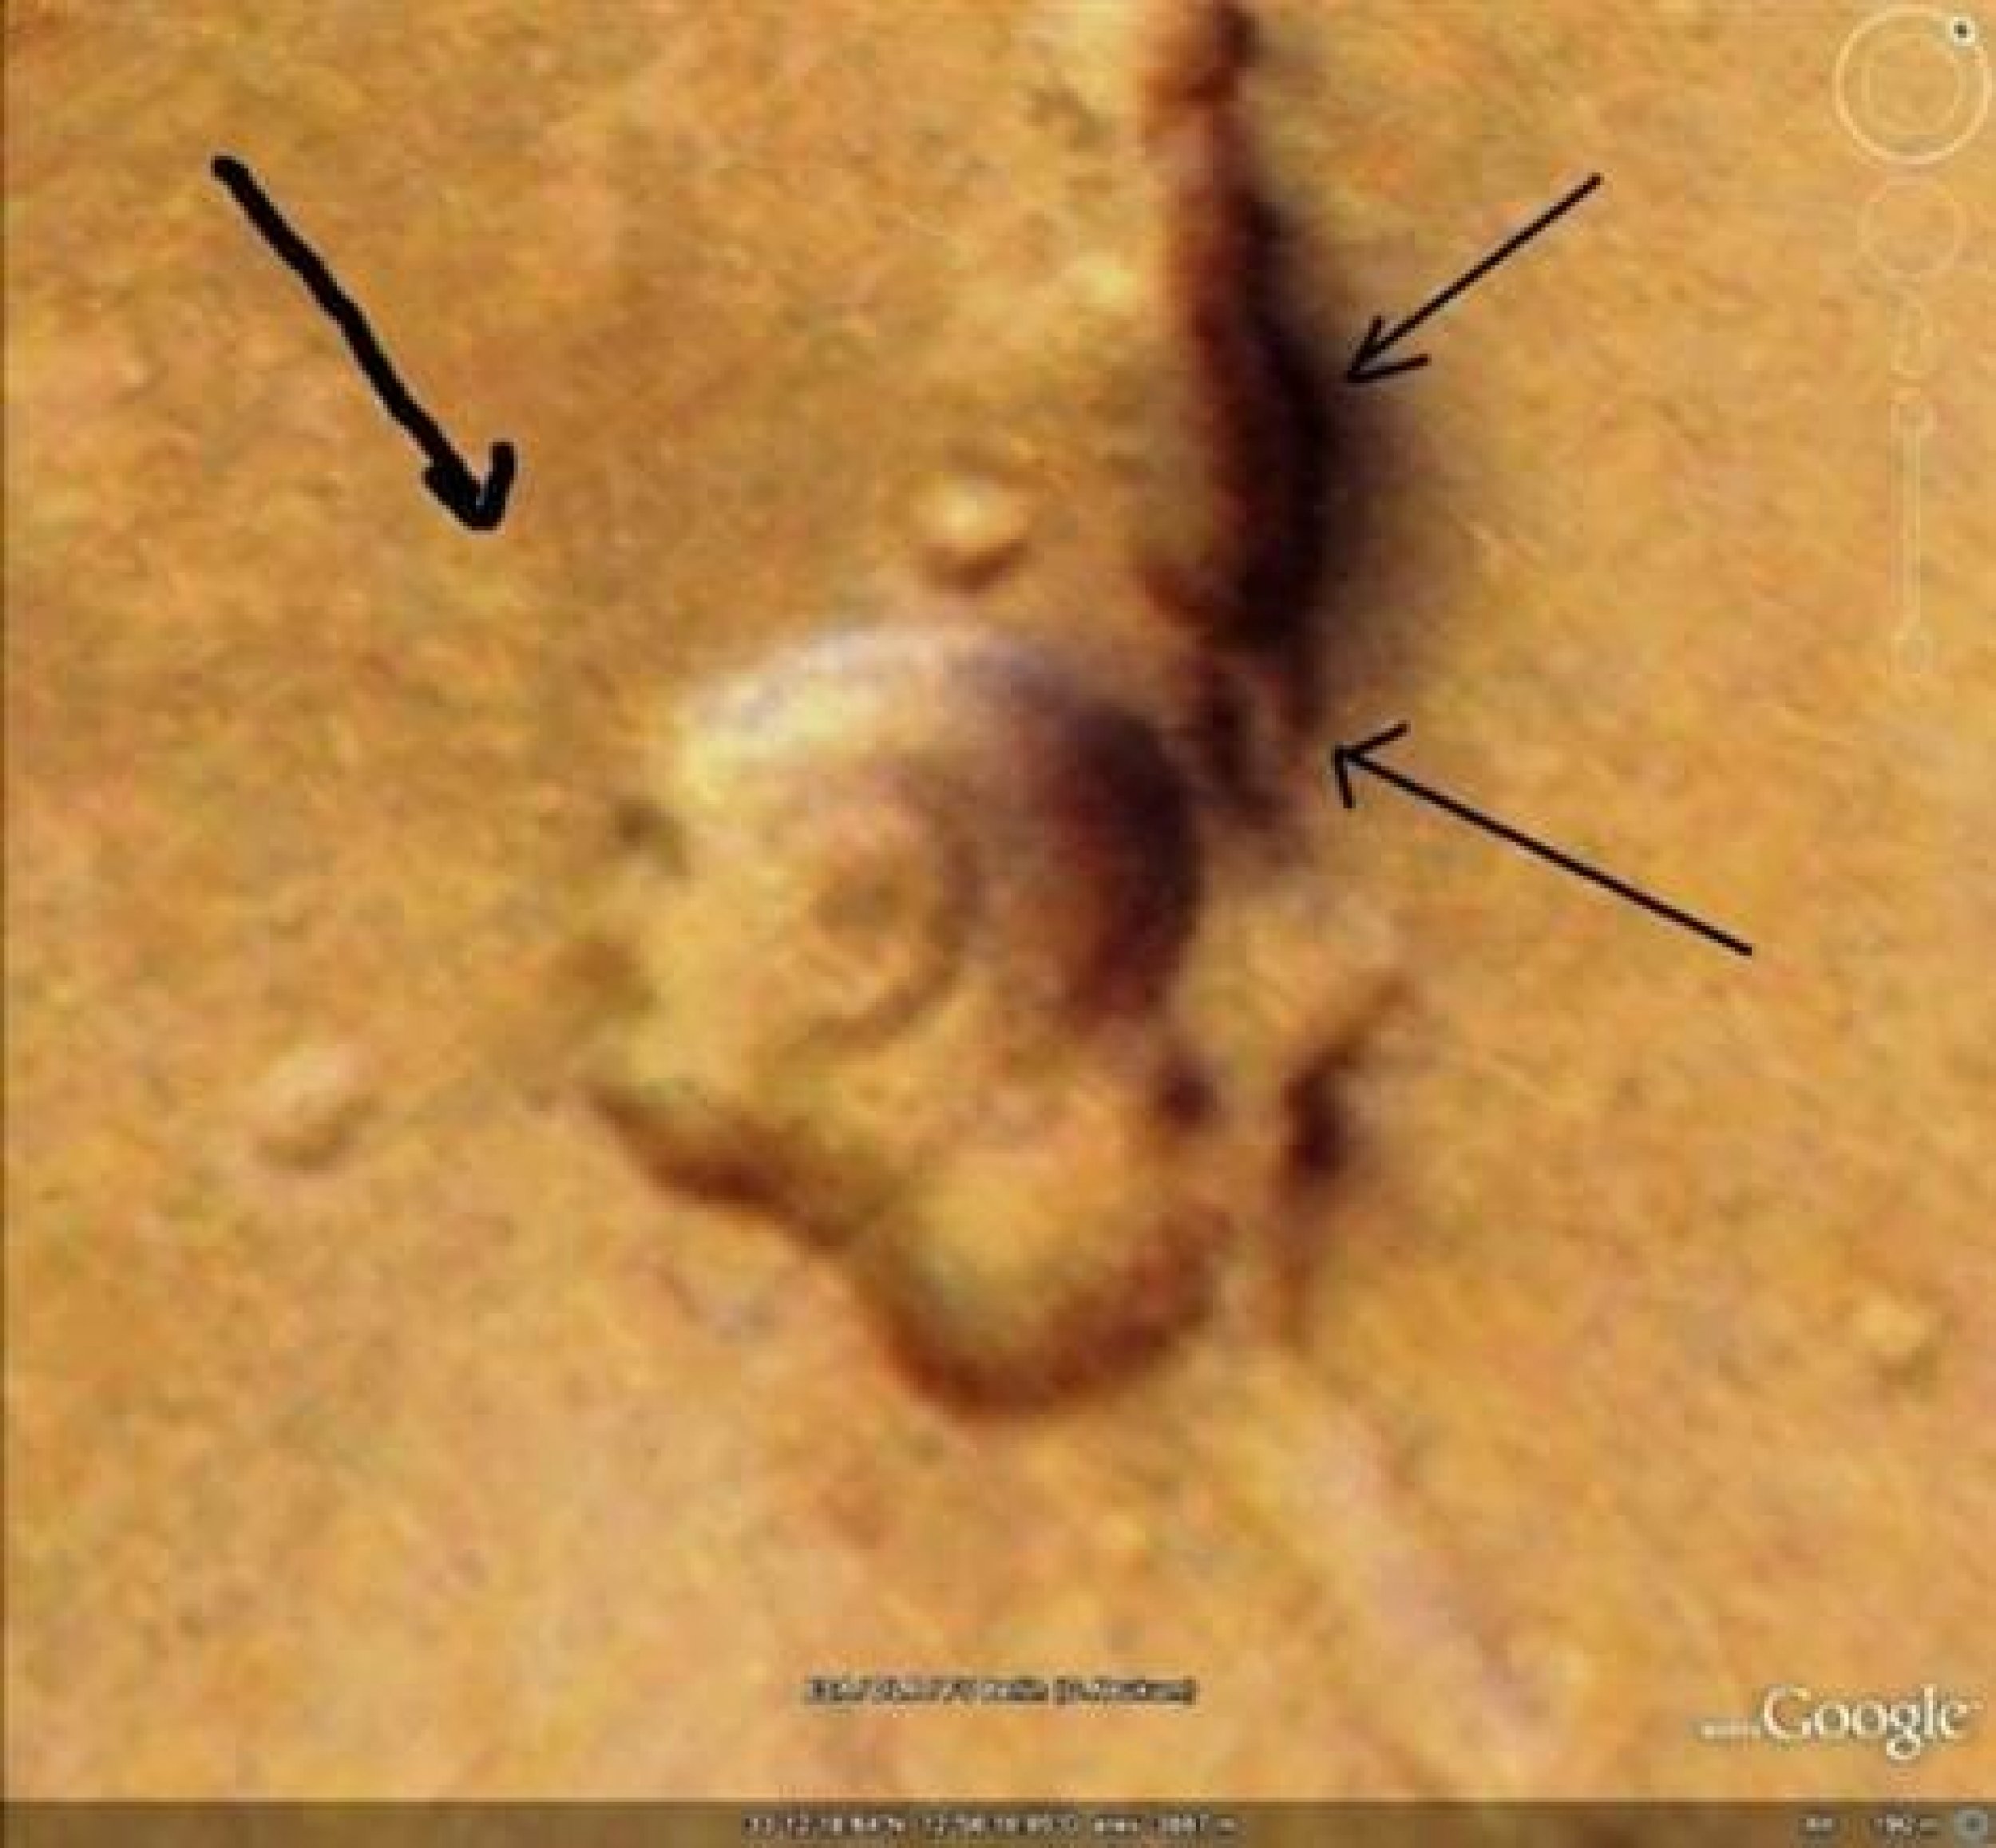 A Martian surface feature that one man says looks like the profile of Mahatma Gandhi